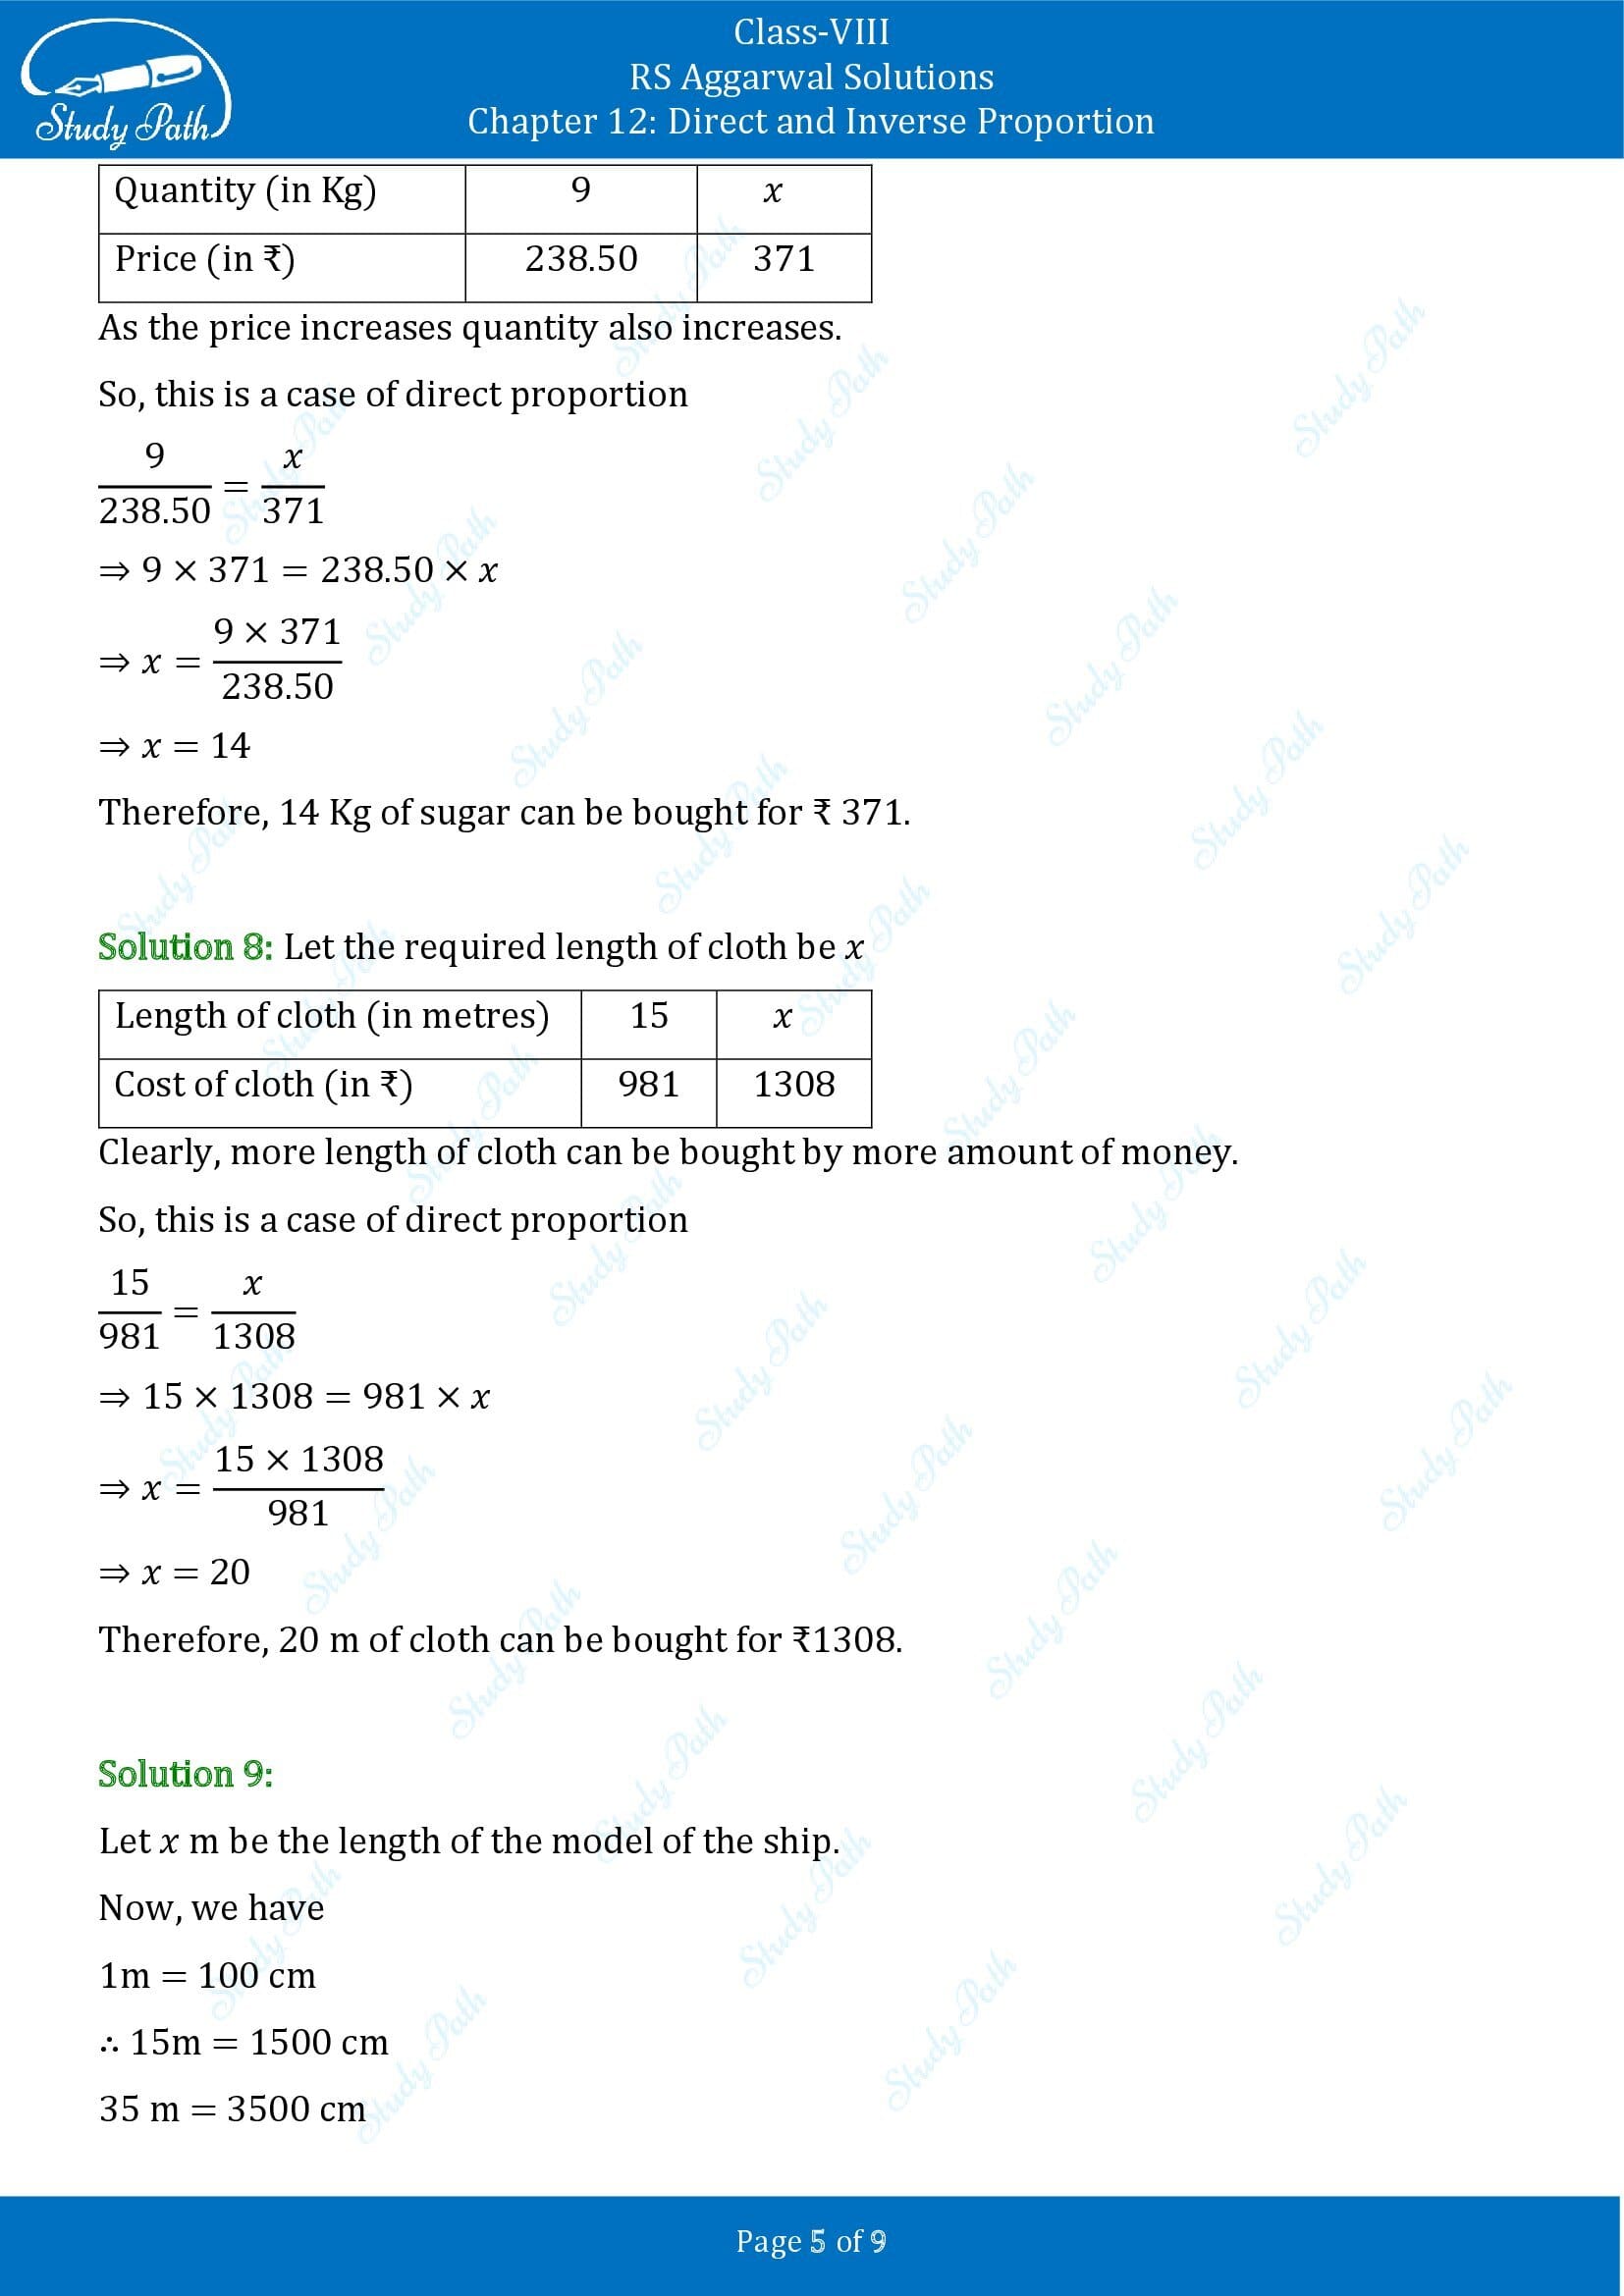 RS Aggarwal Solutions Class 8 Chapter 12 Direct and Inverse Proportion Exercise 12A 00005